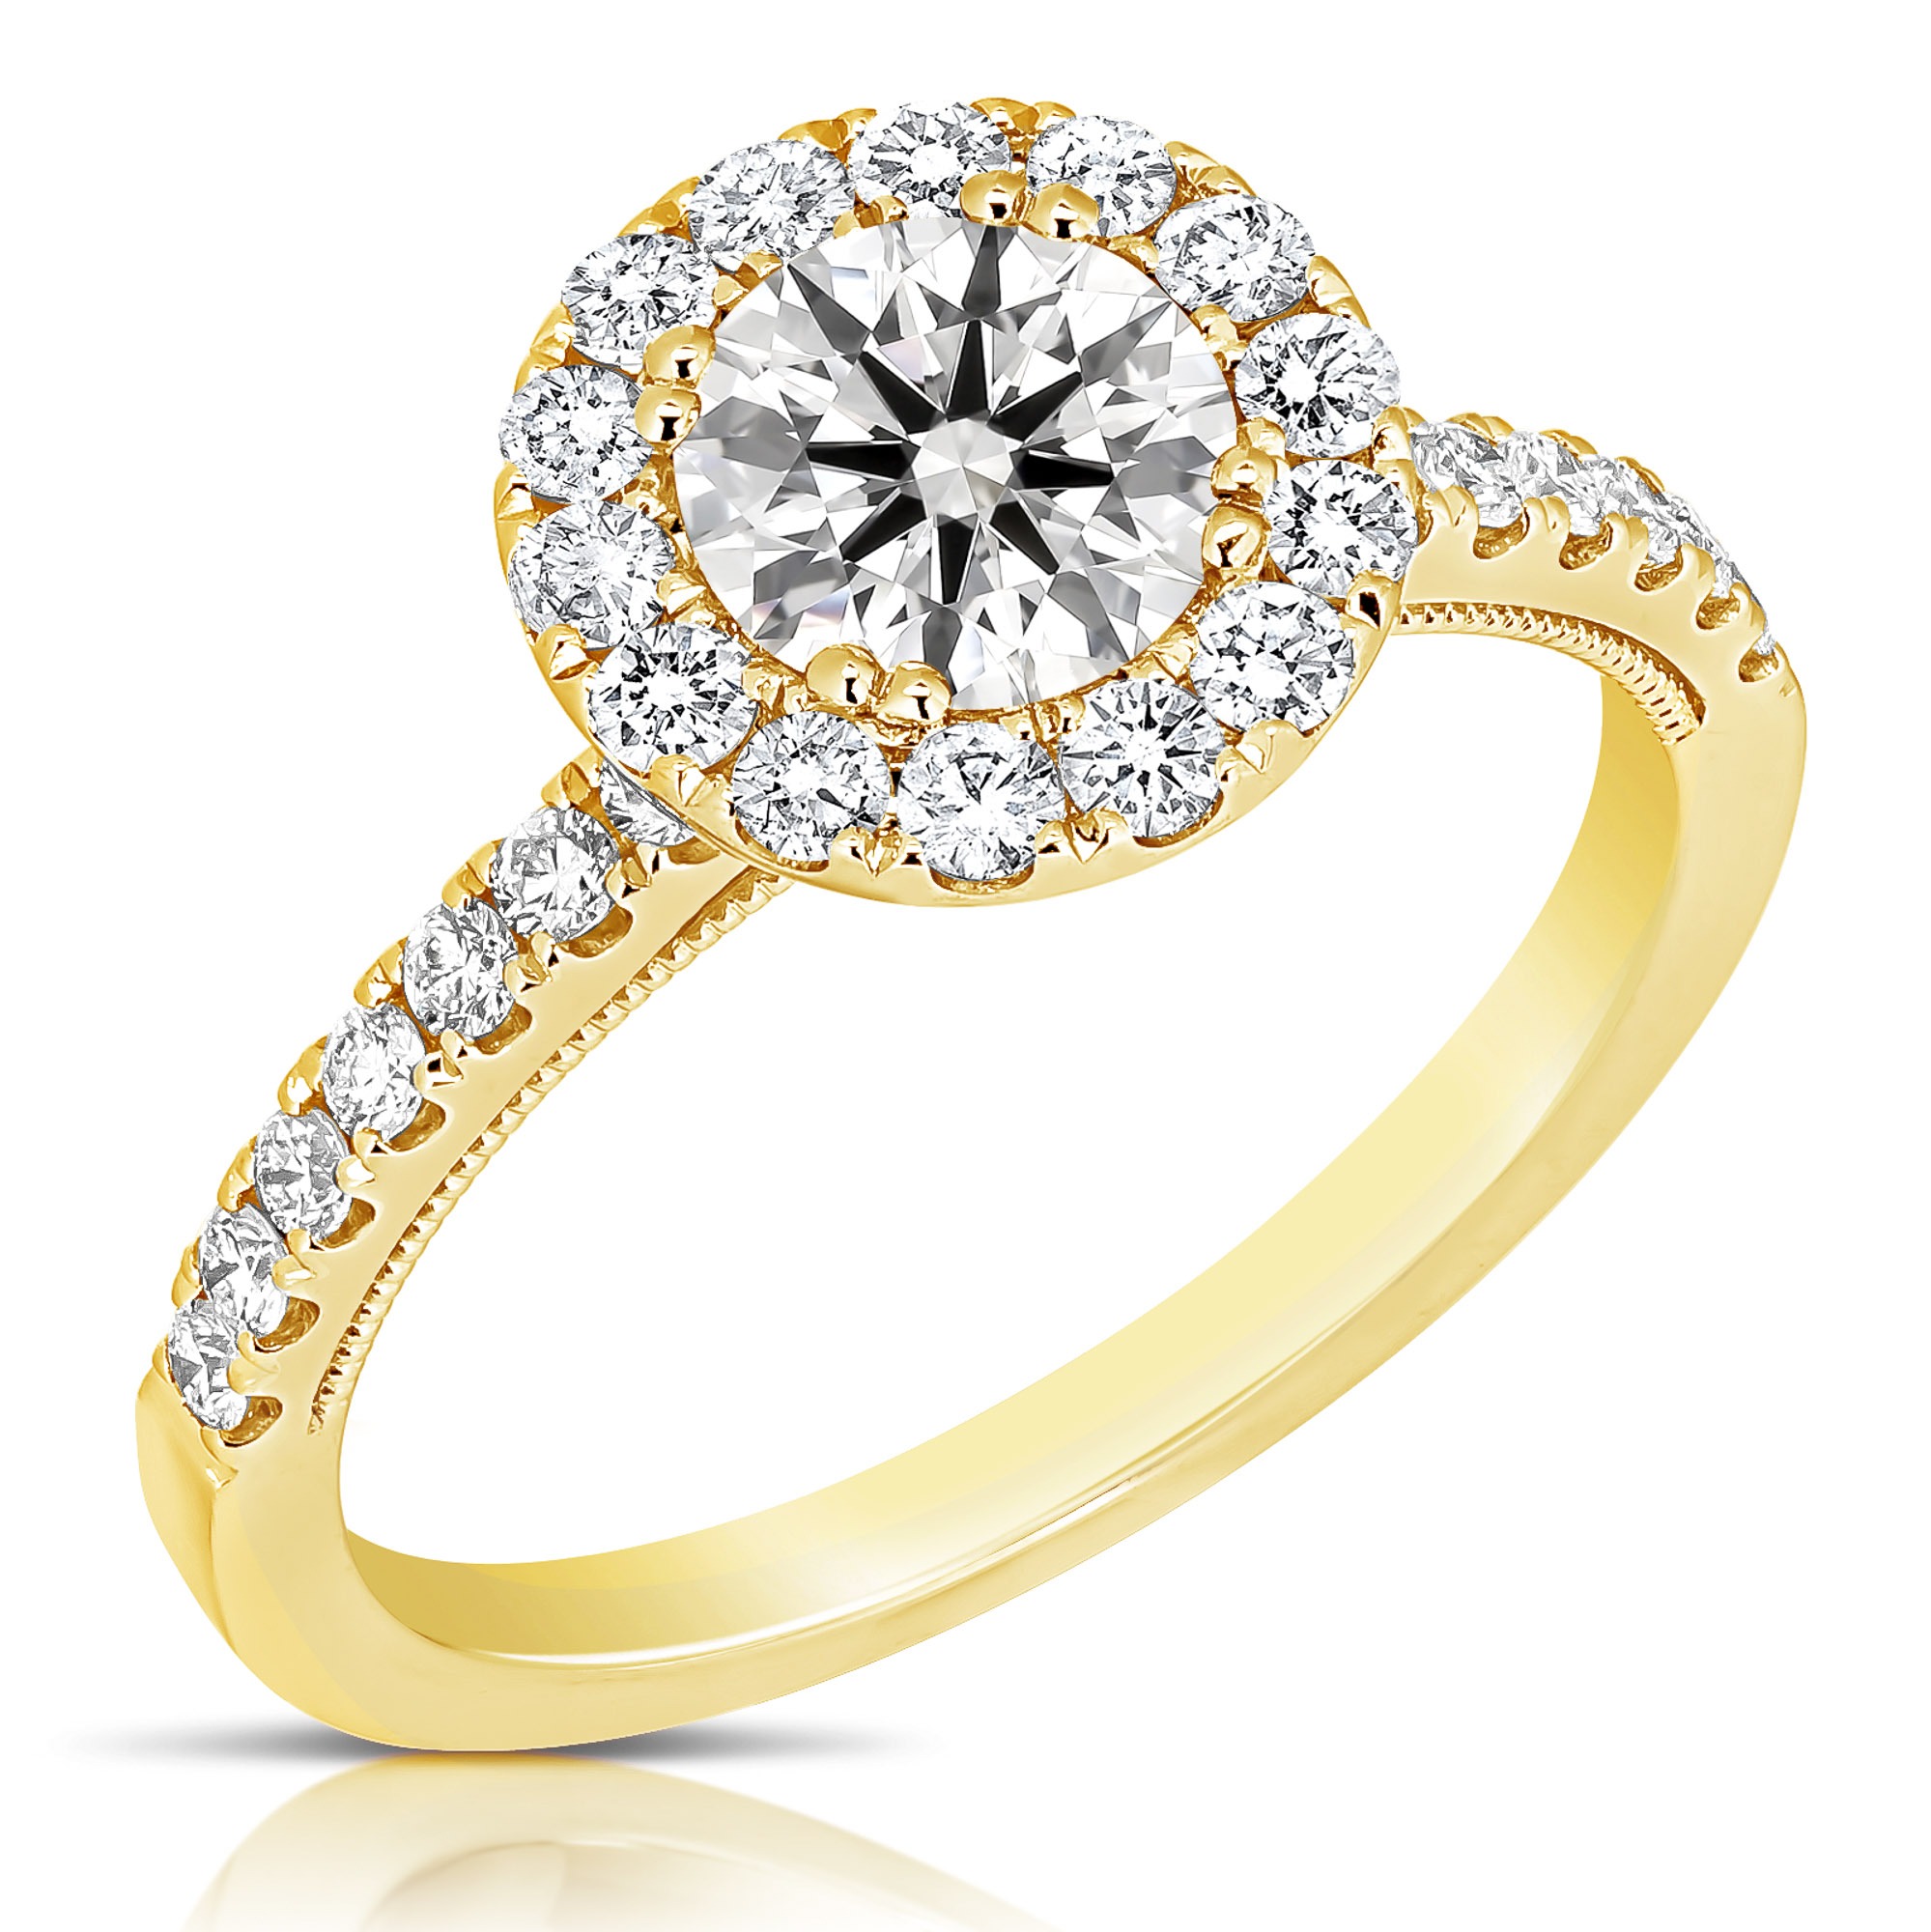 1 CT CENTER ROUND HALO DIAMOND ENGAGEMENT RING CRB100-Y